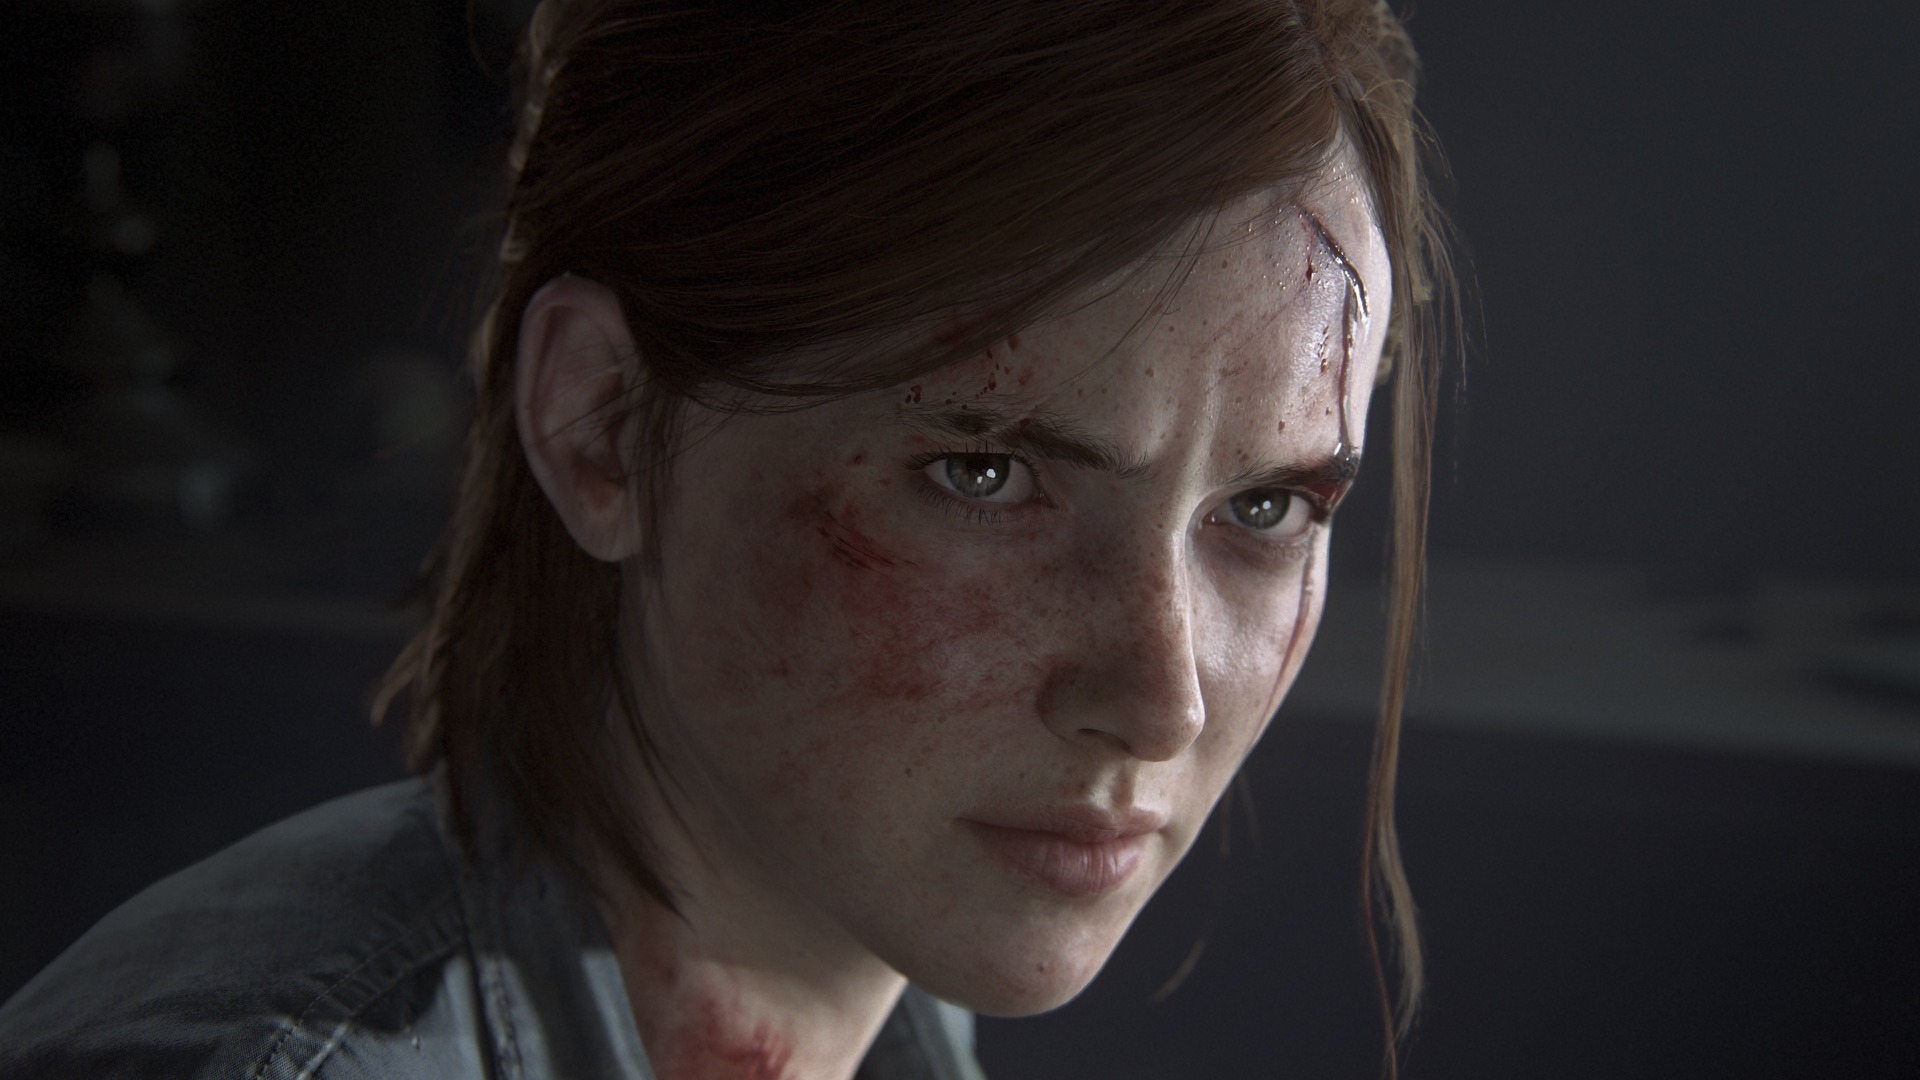 The Last of Us Part II dated for February 2020